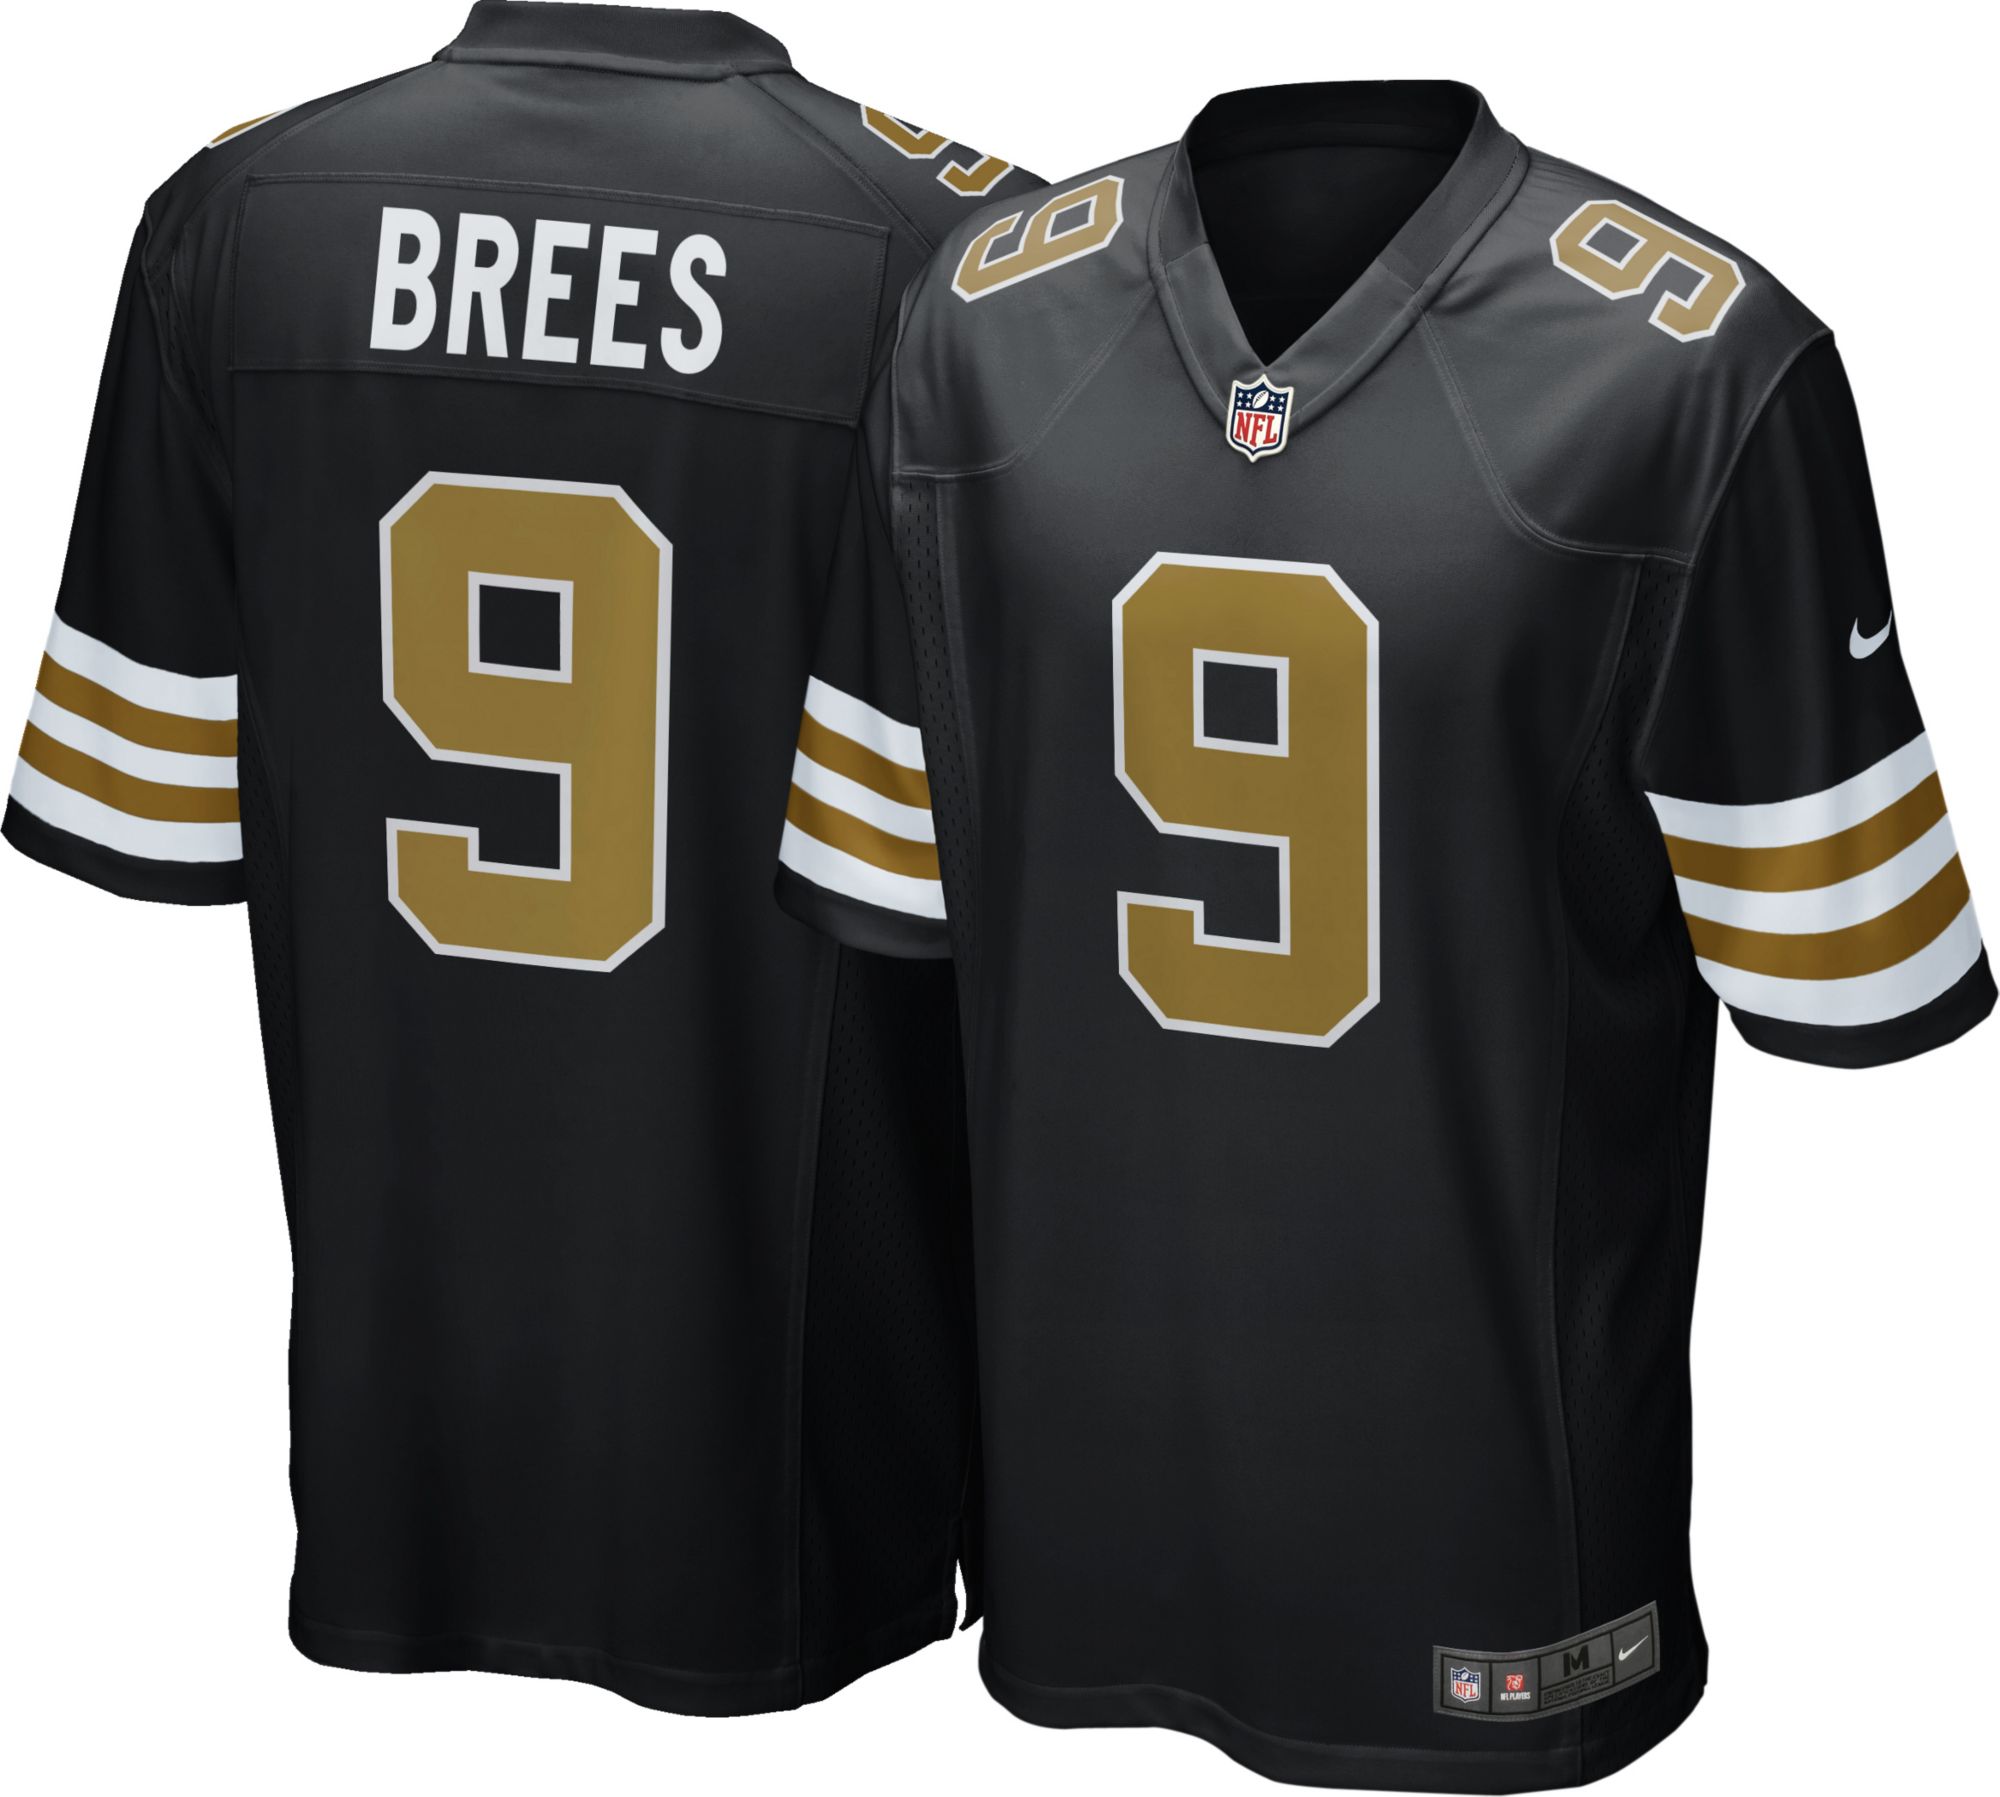 drew brees throwback jersey